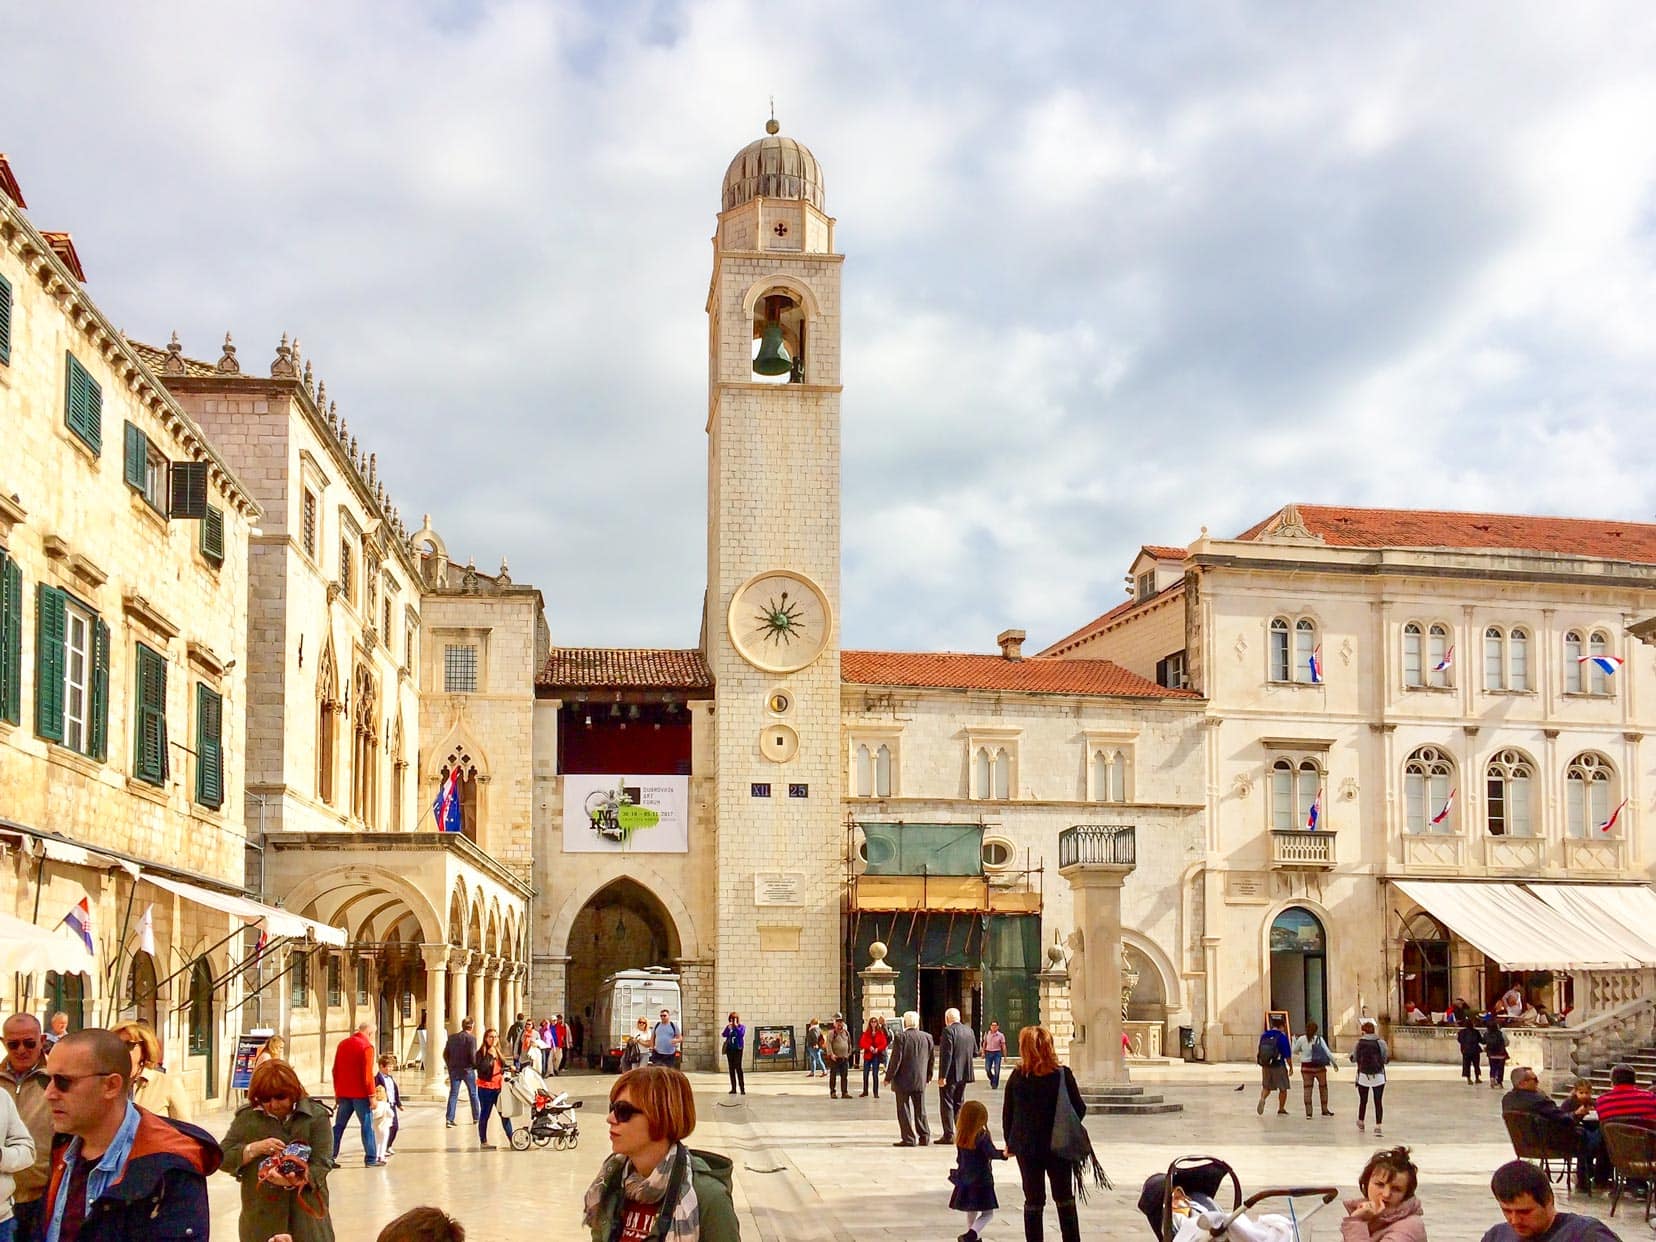 The Dubrovnik Clock Tower